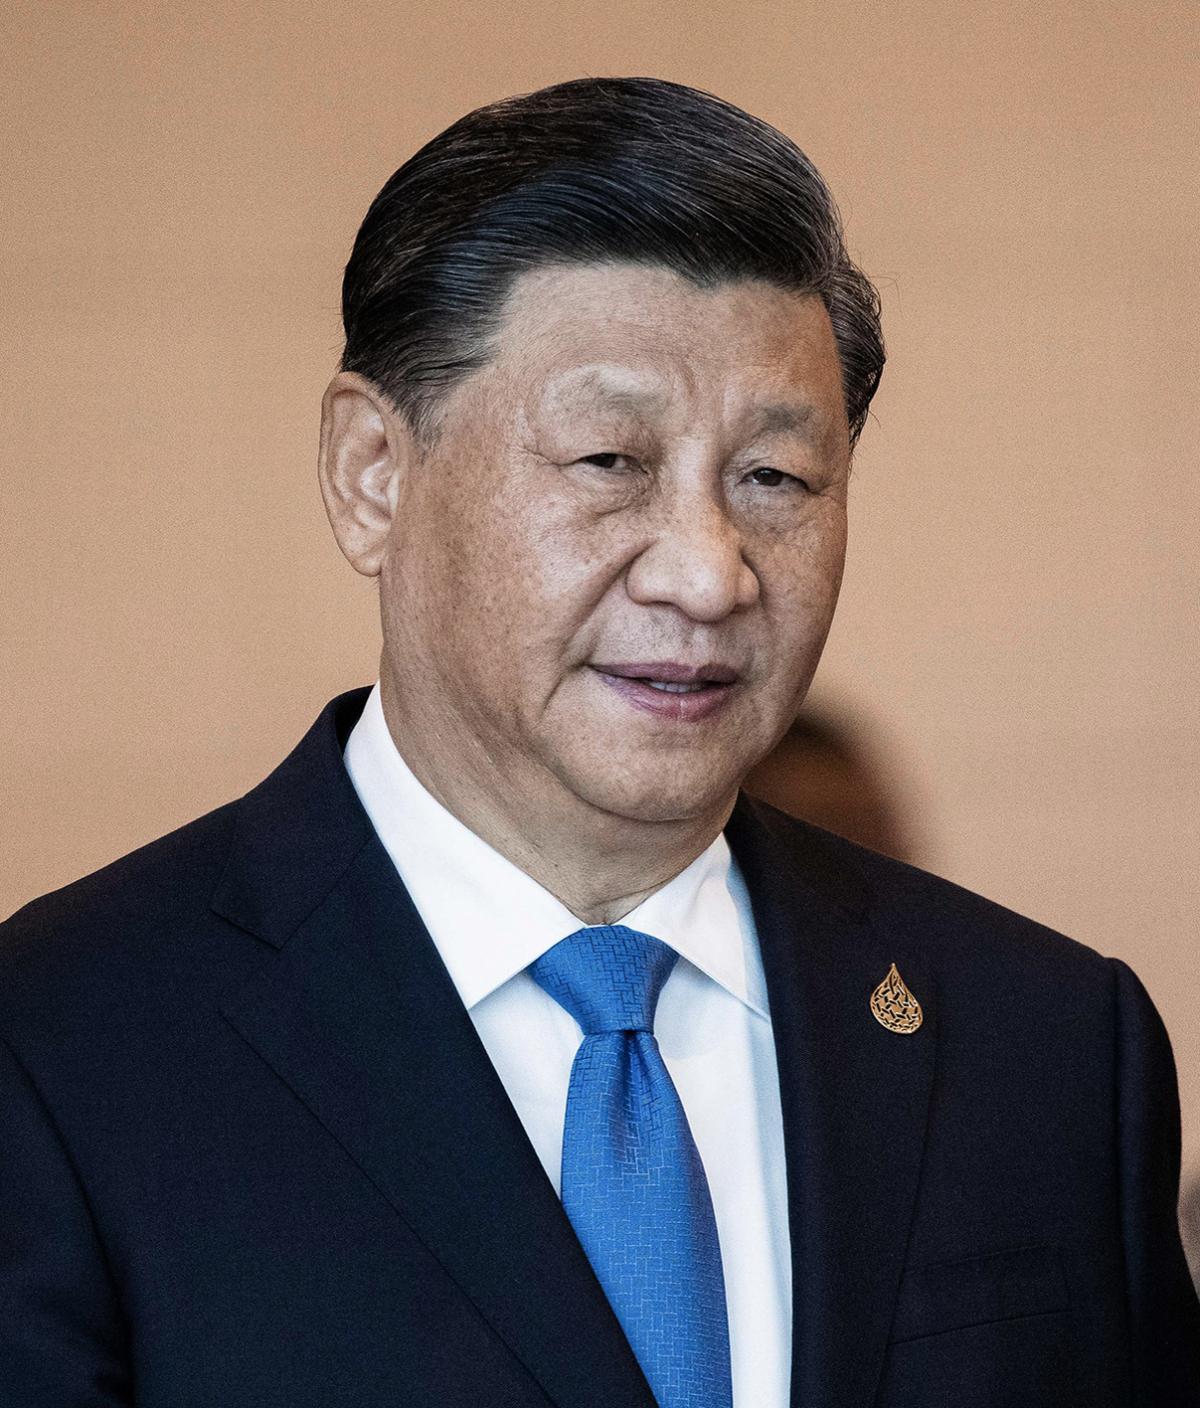 Chinese leader Xi Jinping. (Lauren DeCicca/Getty Images)